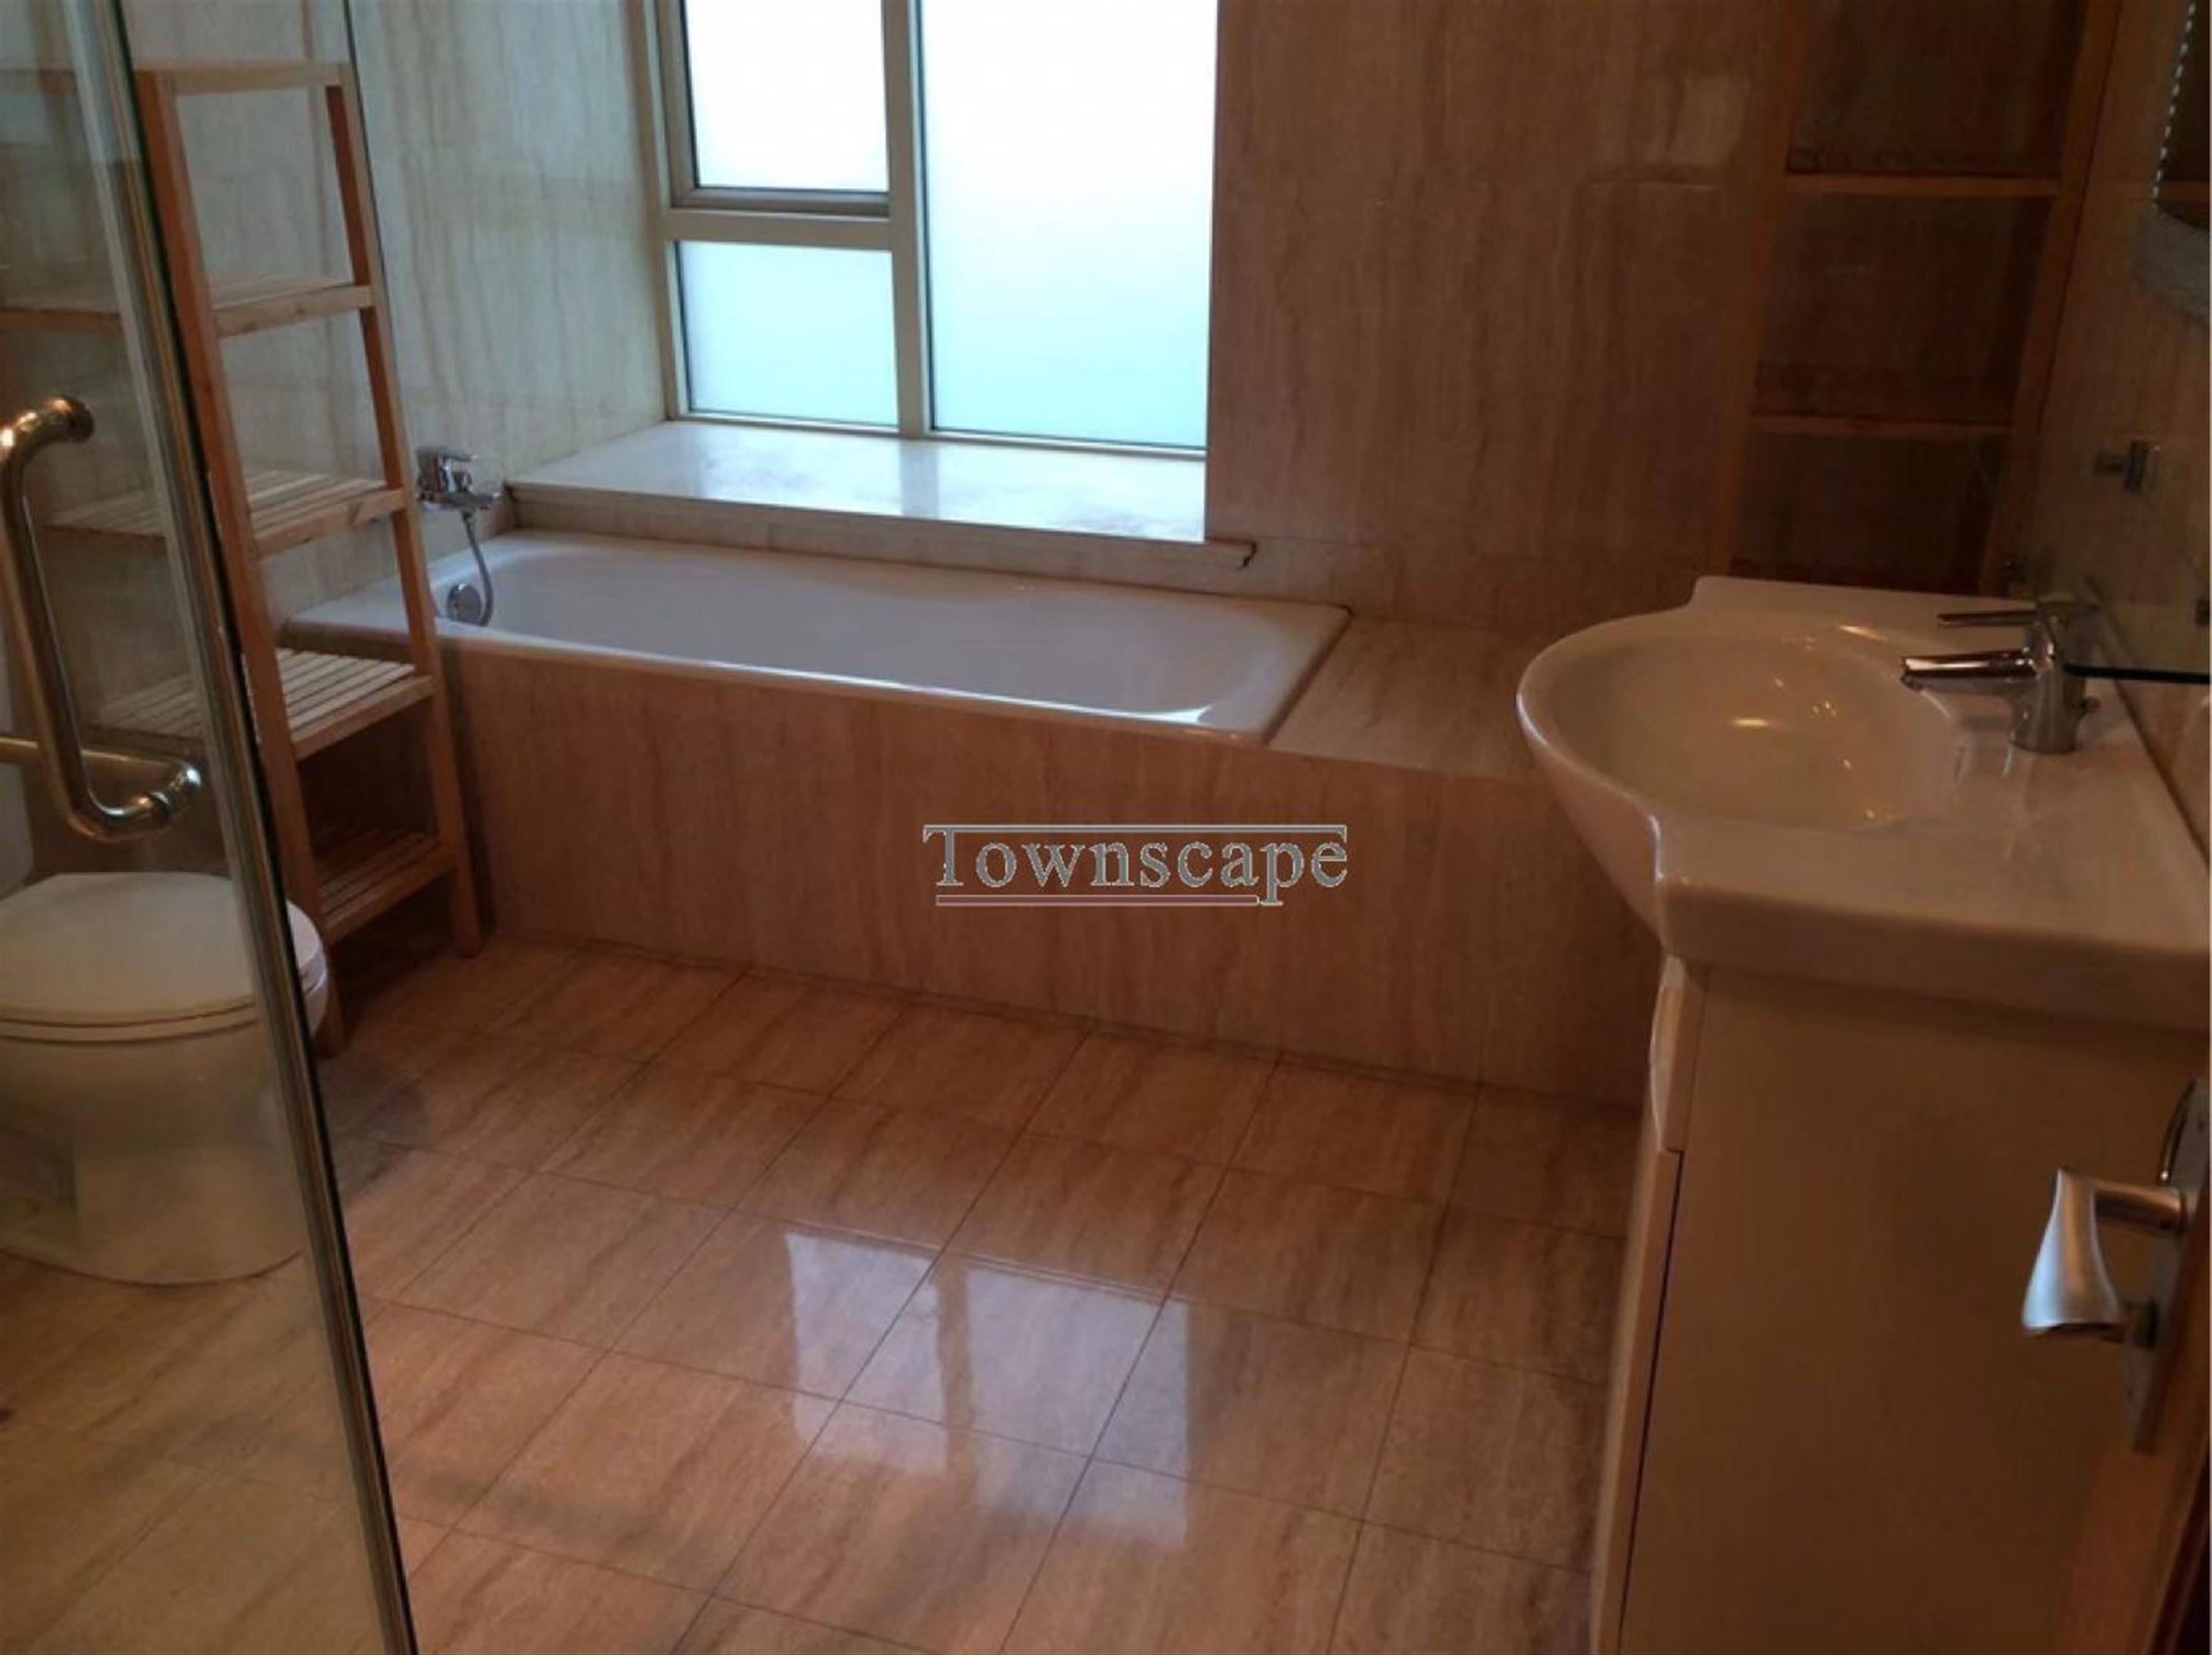  Comfy 3BR LaDoll Apt for Rent in Shanghai